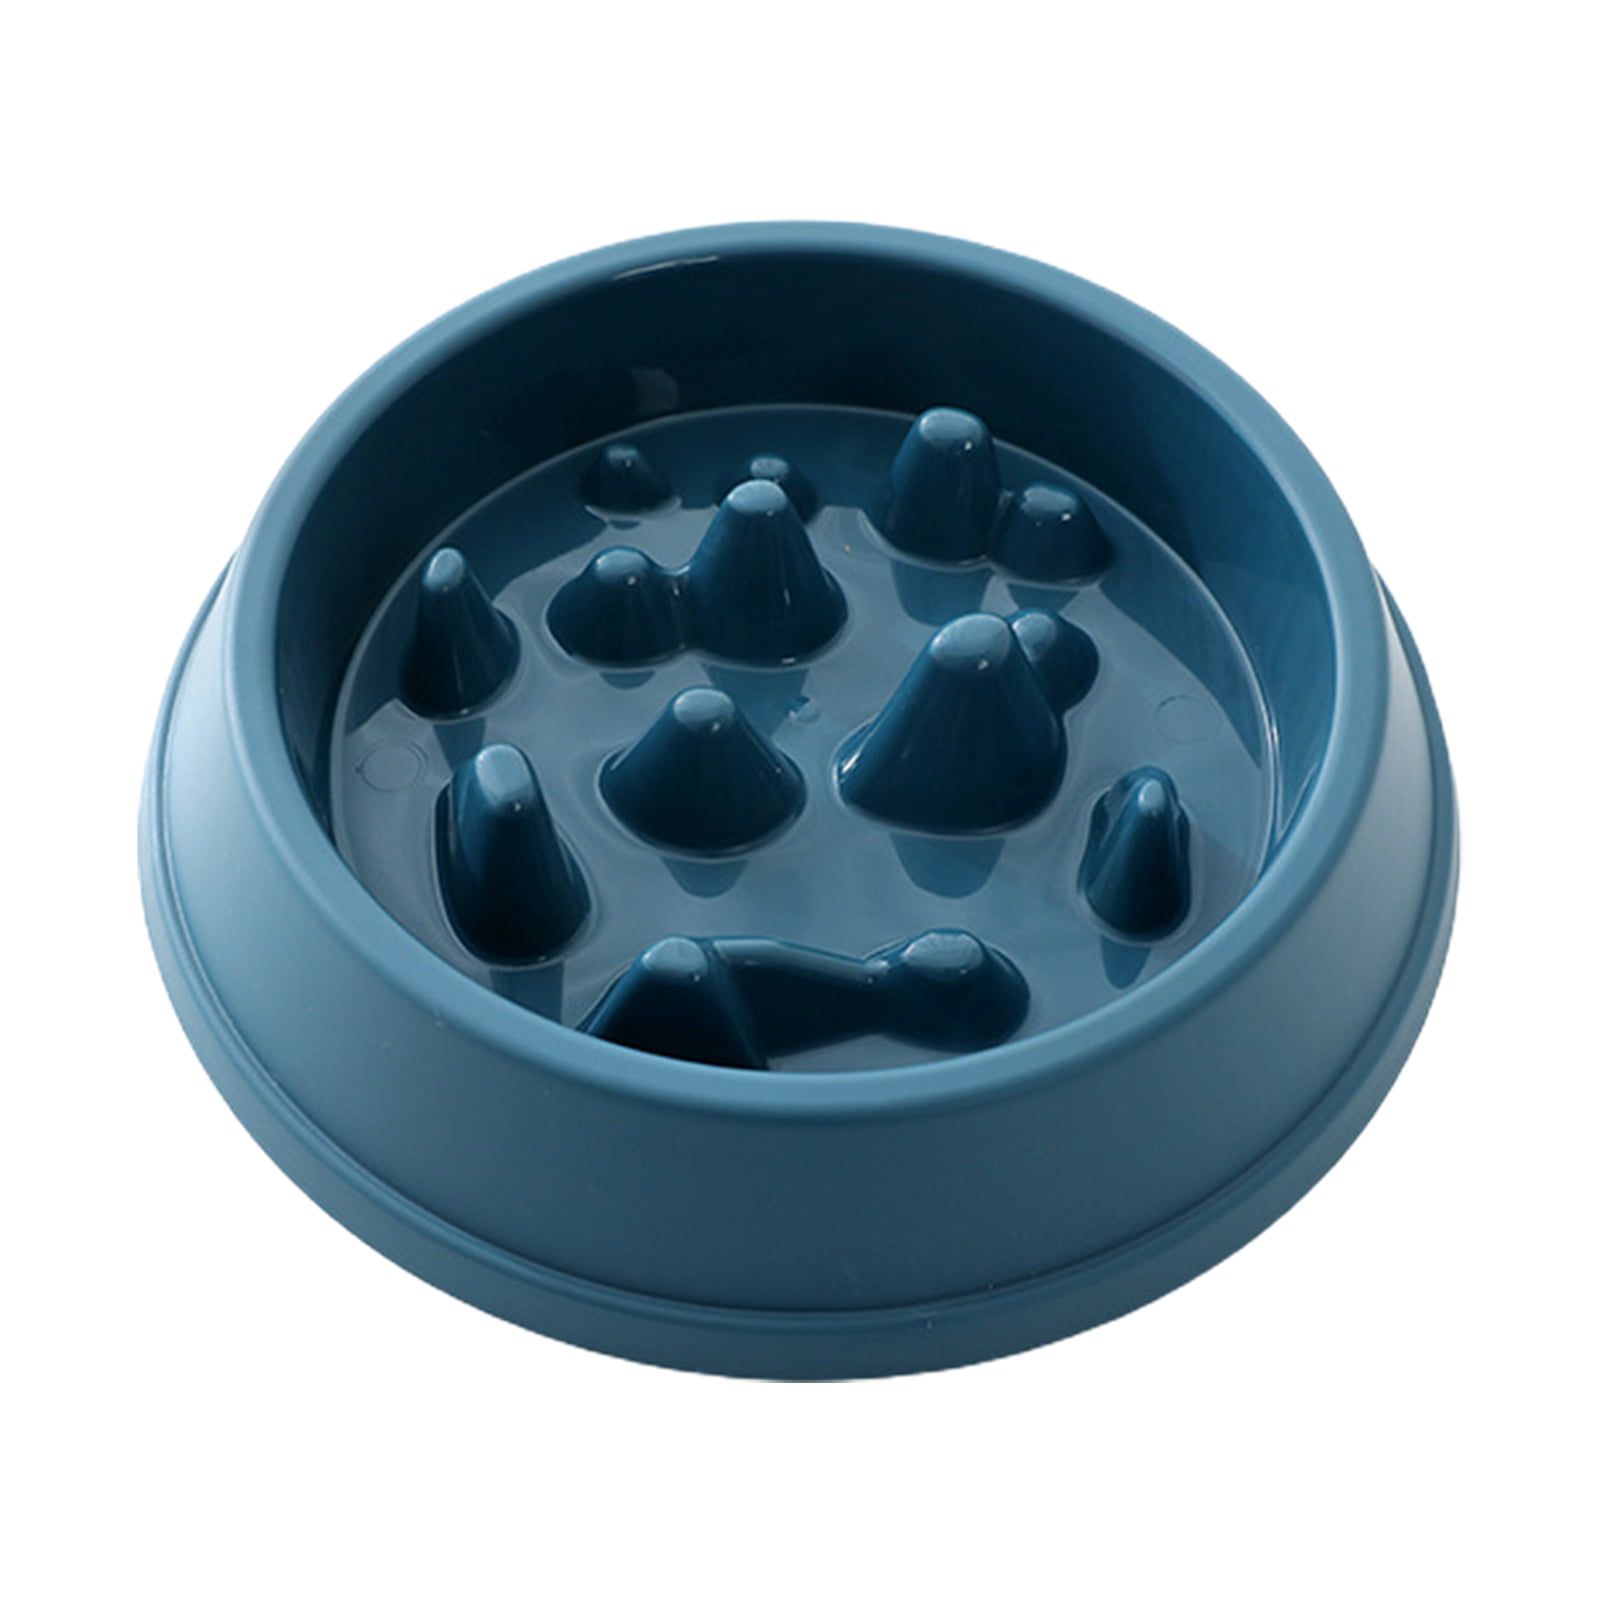 Riot Food Bowl For Dogs And Cats With Non-slip Base Slow Food Bowl Promotes  Healthy Eating Suitable For Small To Medium Pets Adjustable Capacity